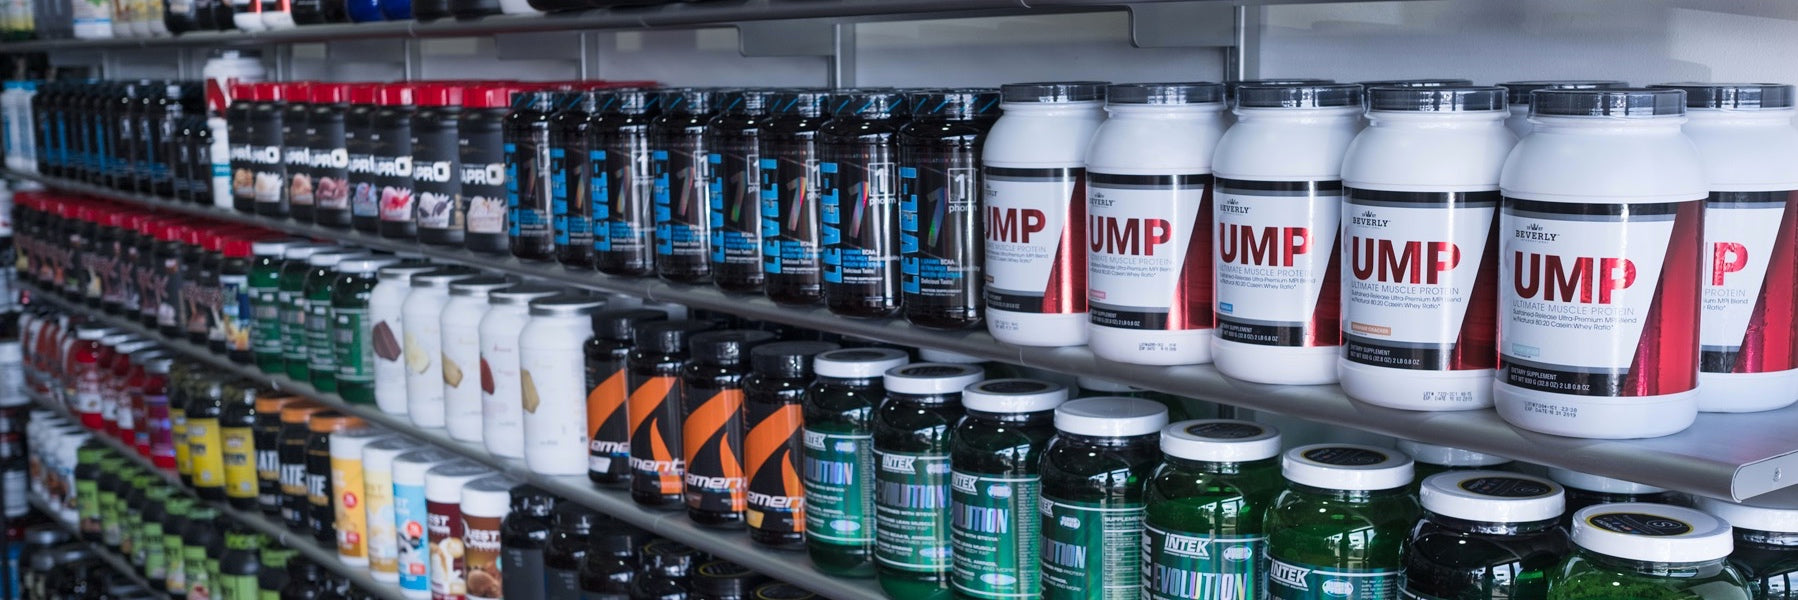 supplement-superstores-protein-selection